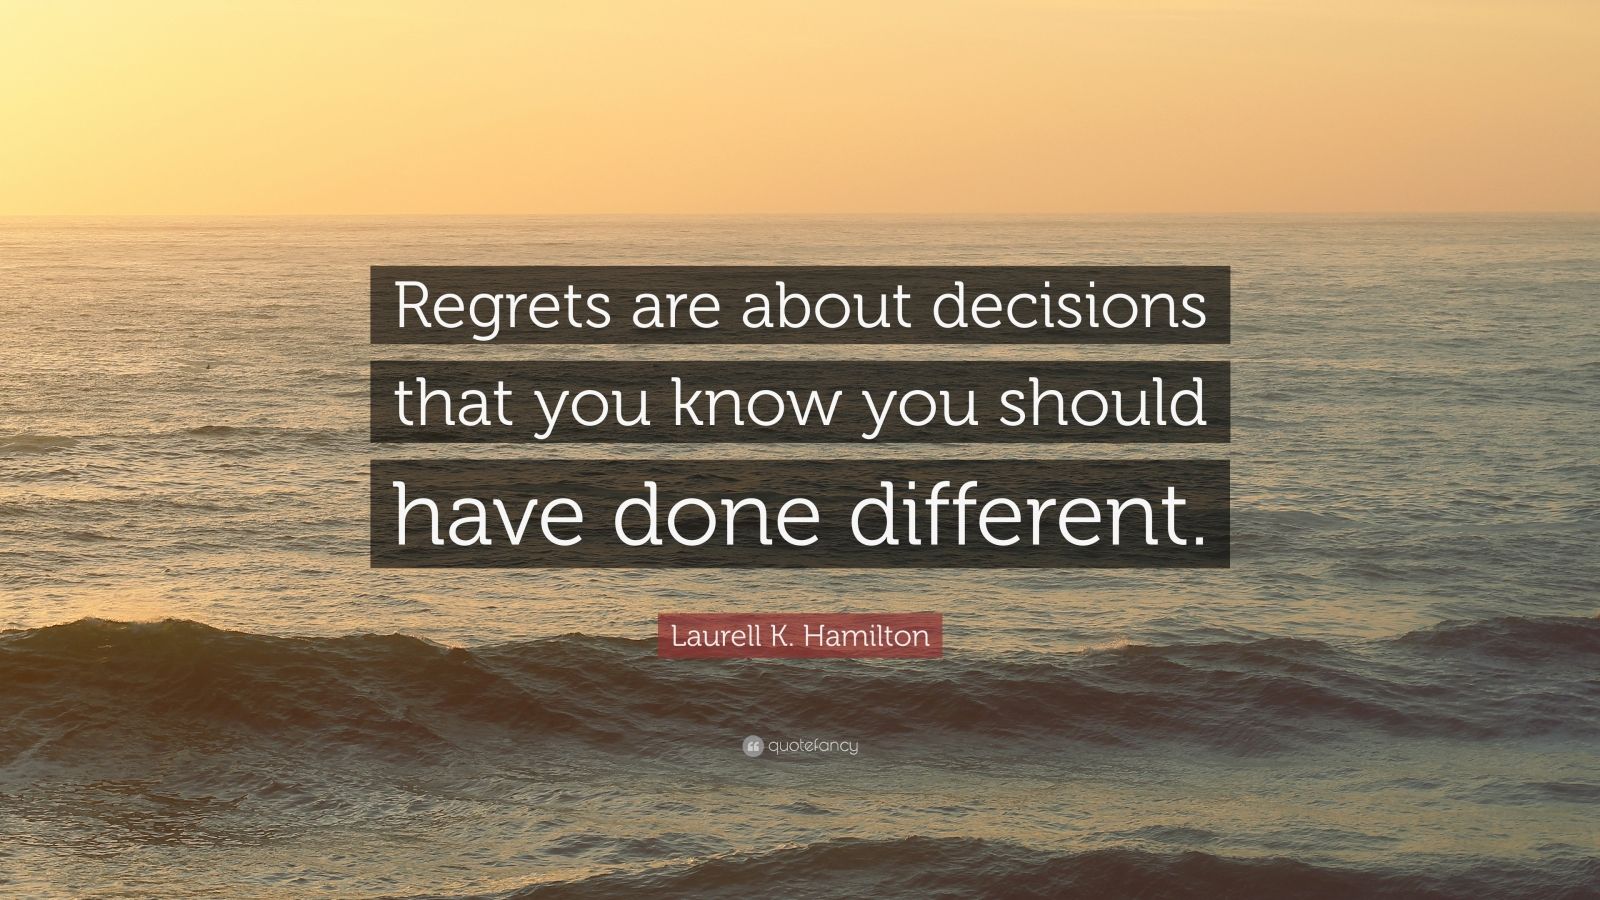 Laurell K. Hamilton Quote “Regrets are about decisions